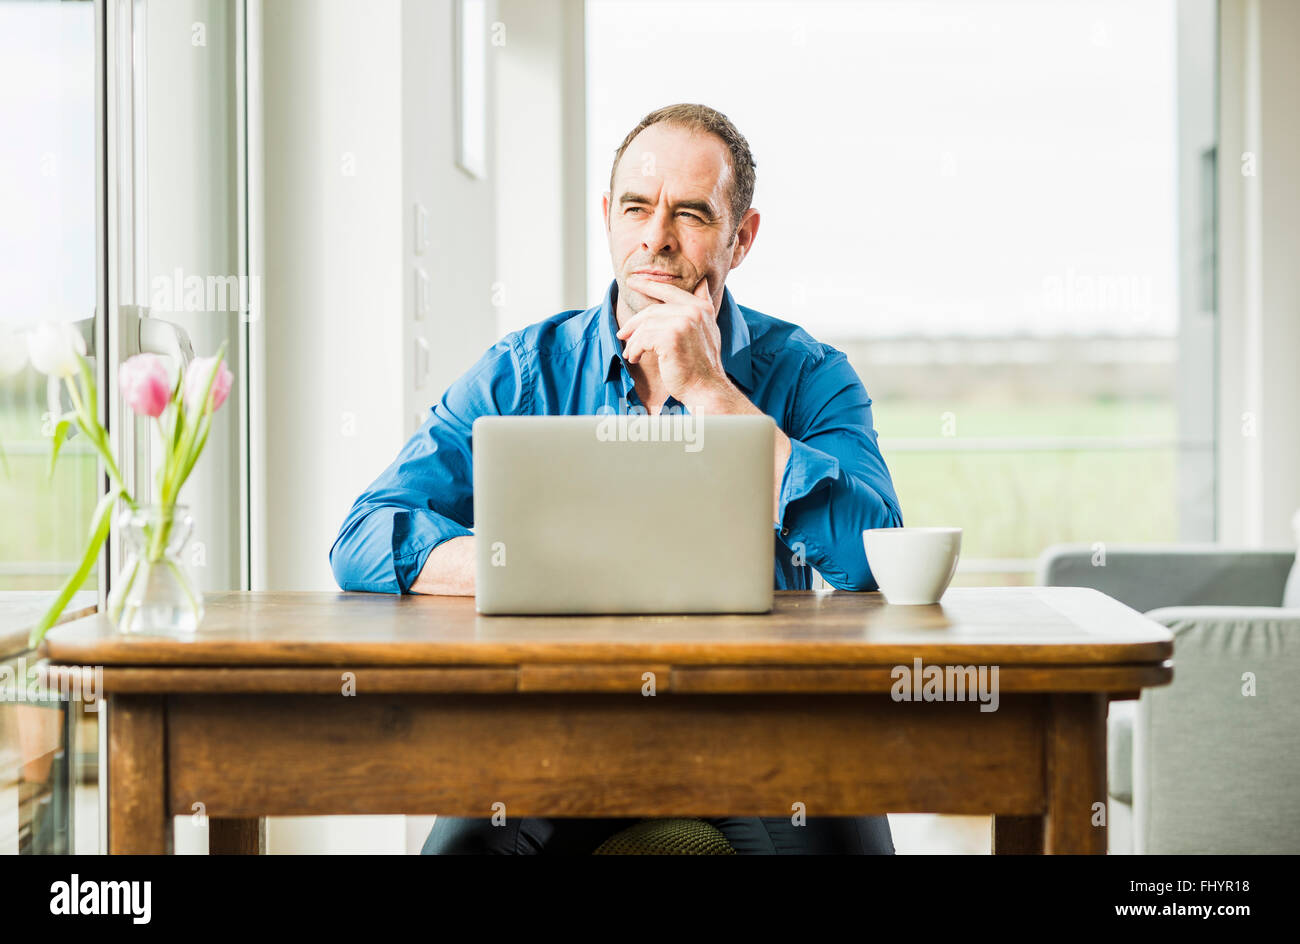 Businessman at home with laptop at wooden table thinking Stock Photo